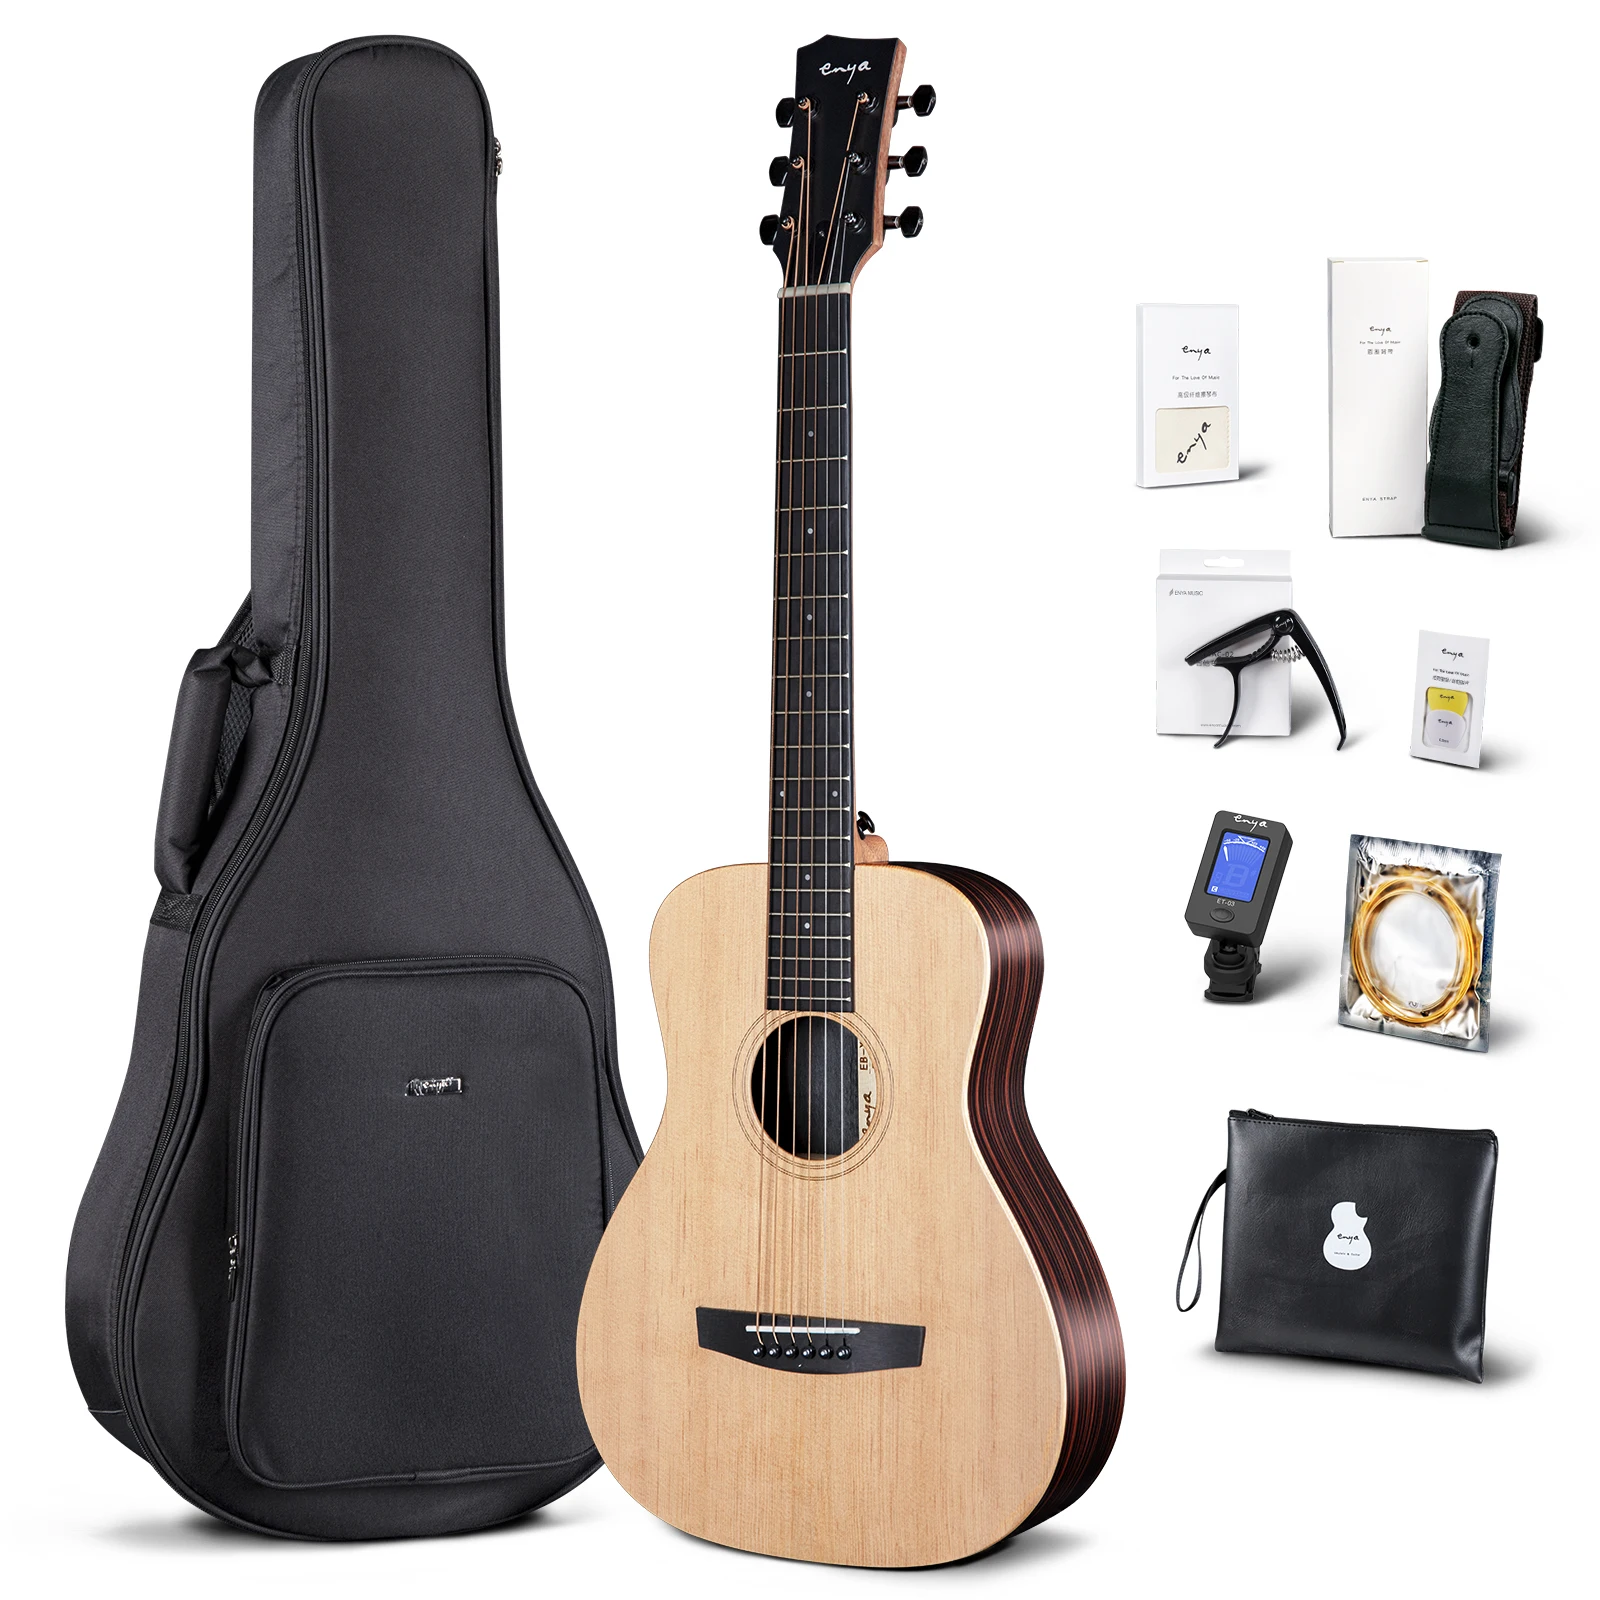 Enya Acoustic Guitar 34 inch Spruce Top Guitar for Beginner Children Learn-to-Play Bundle with Case, Strap, String, Capo, Pick